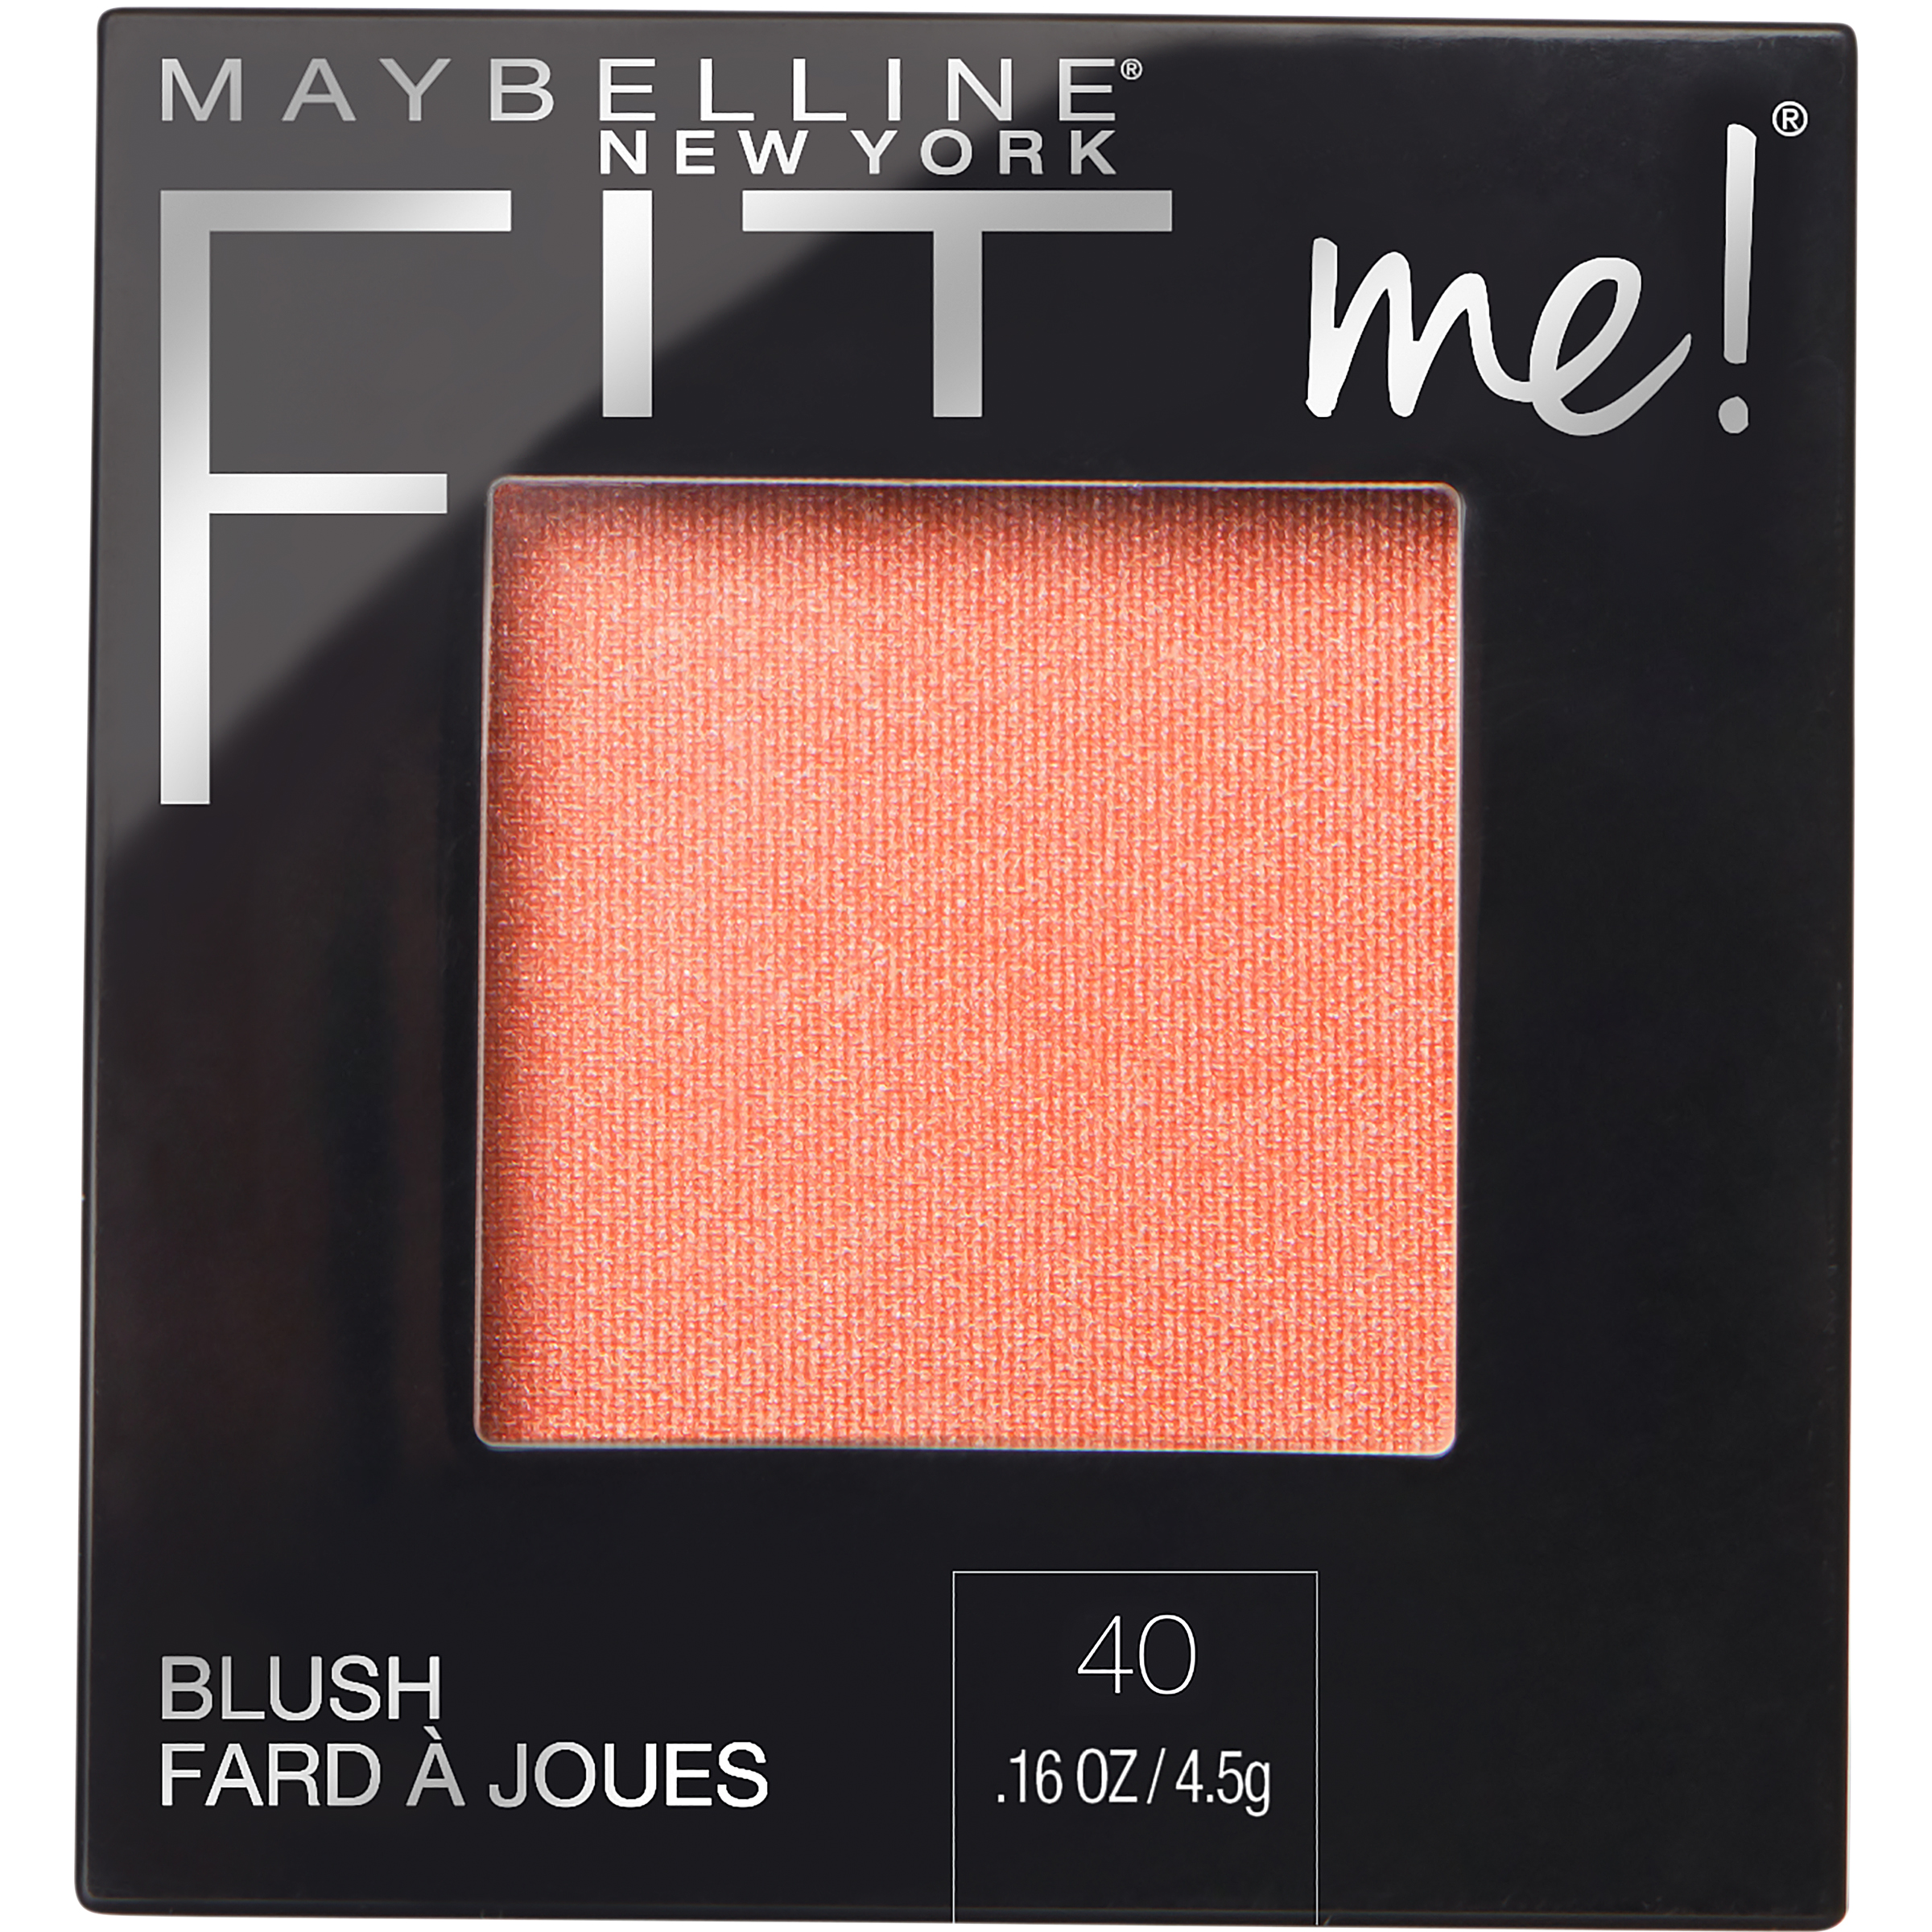 Maybelline New York Maybelline&#174; New York Fit Me!&#174; Blush 40 Peach 0.16 oz. Compact